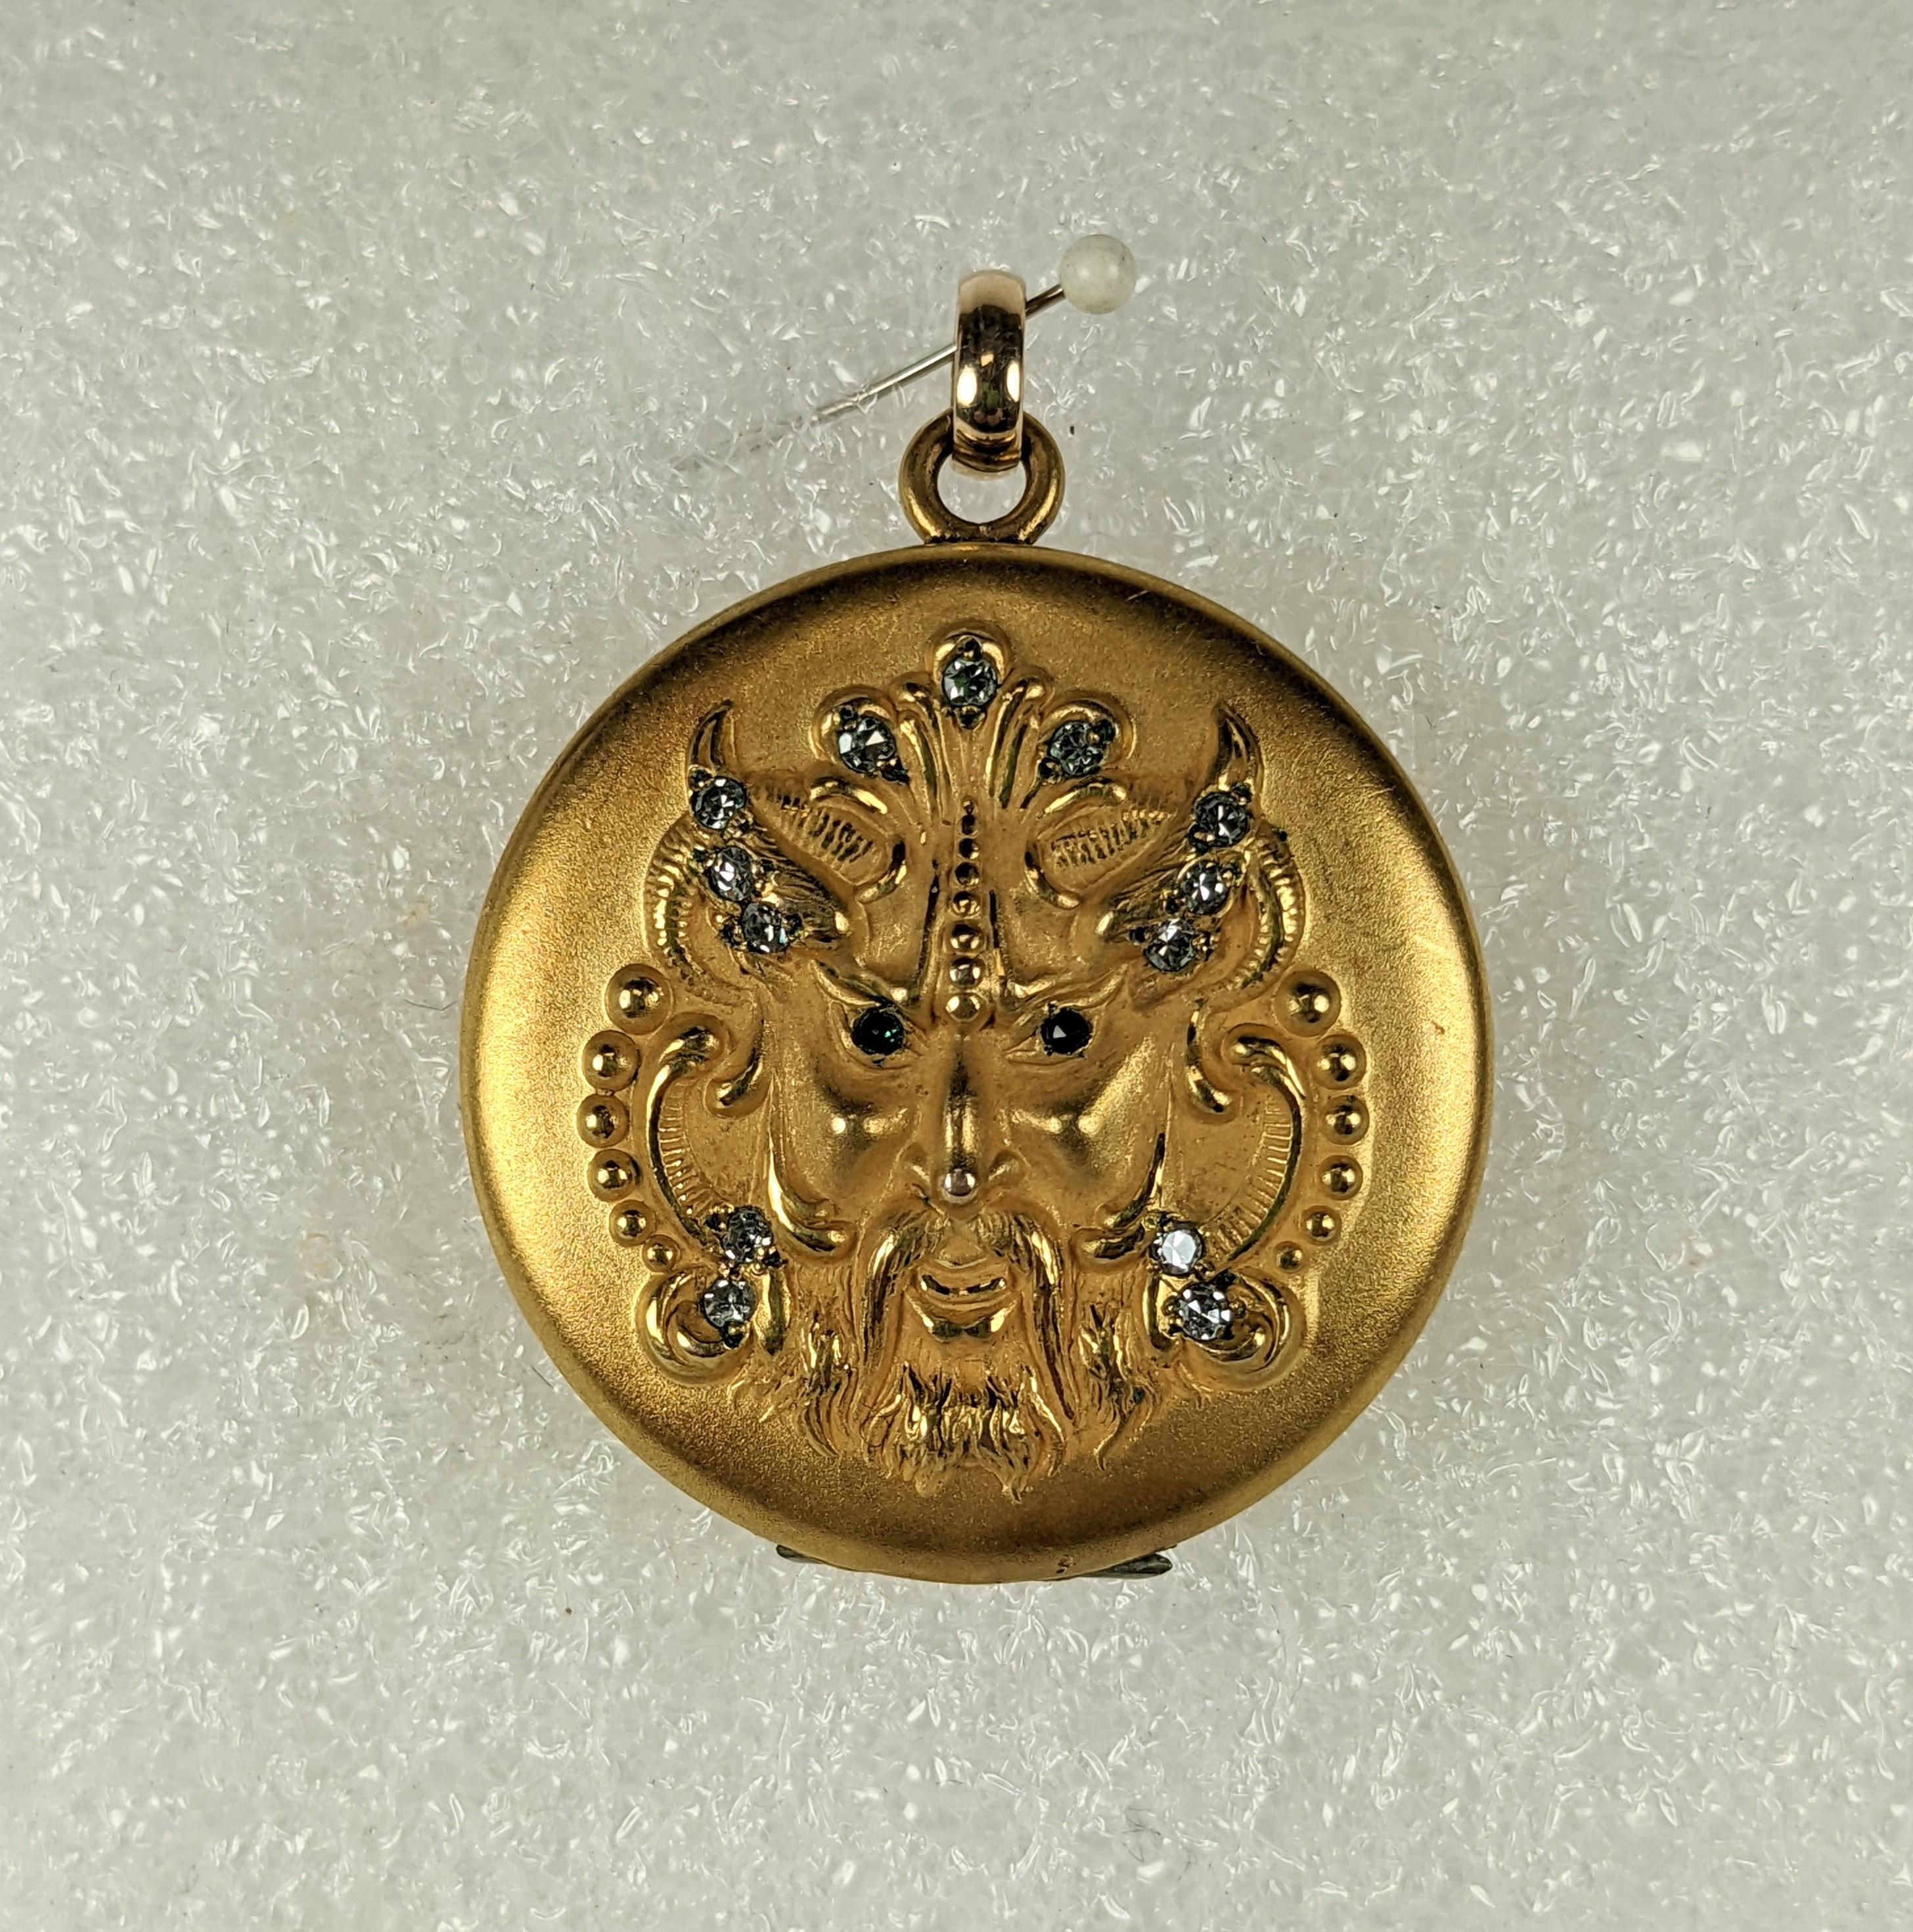 Super unusual Victorian Devil motif locket highlighted with green eyes and crystal pastes from the late 19th Century set in gold filled metal. Excellent condition. 1.25